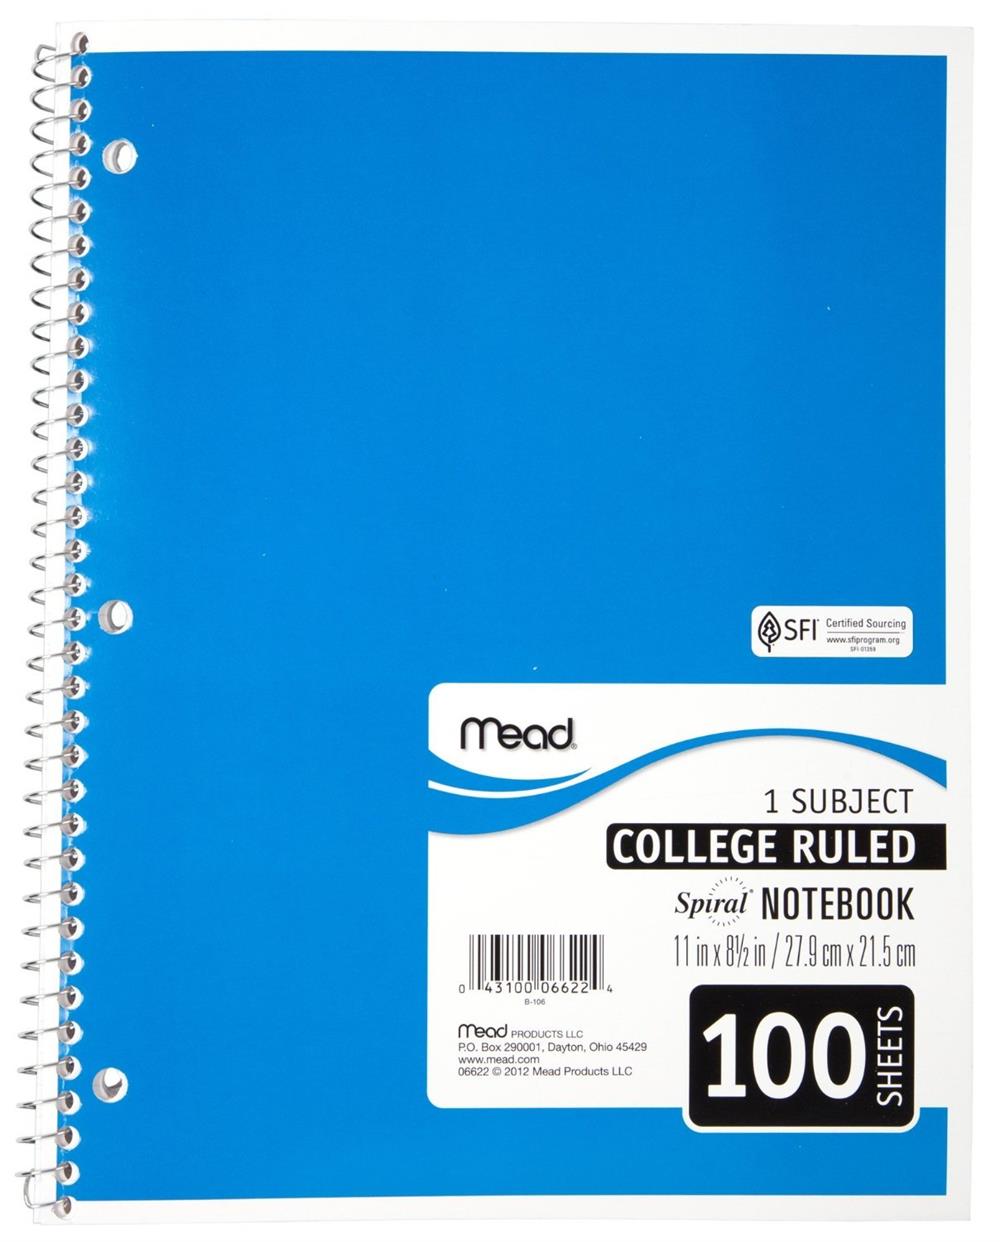 Mead 1 Subject College Ruled Spiral Notebook